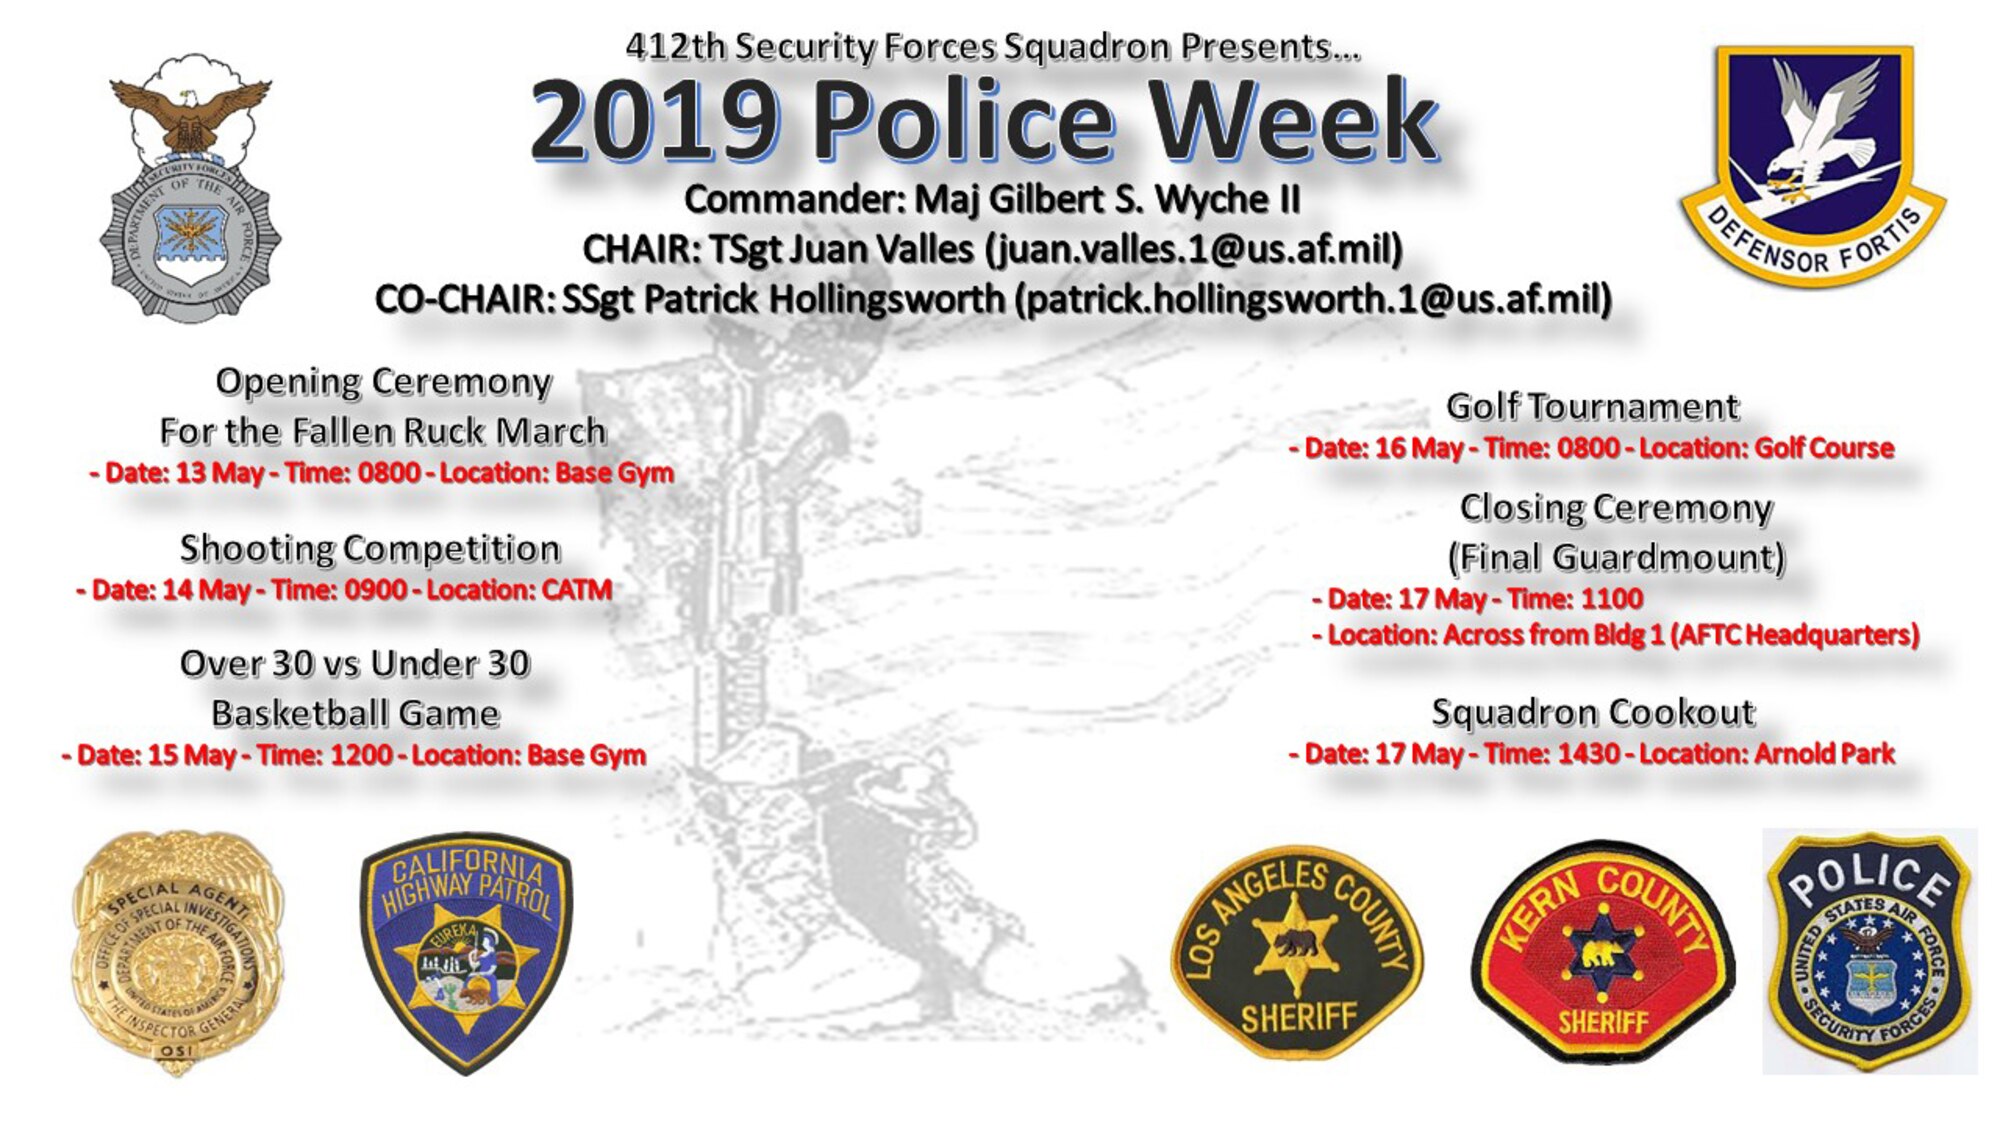 2019 Police Week events flyer